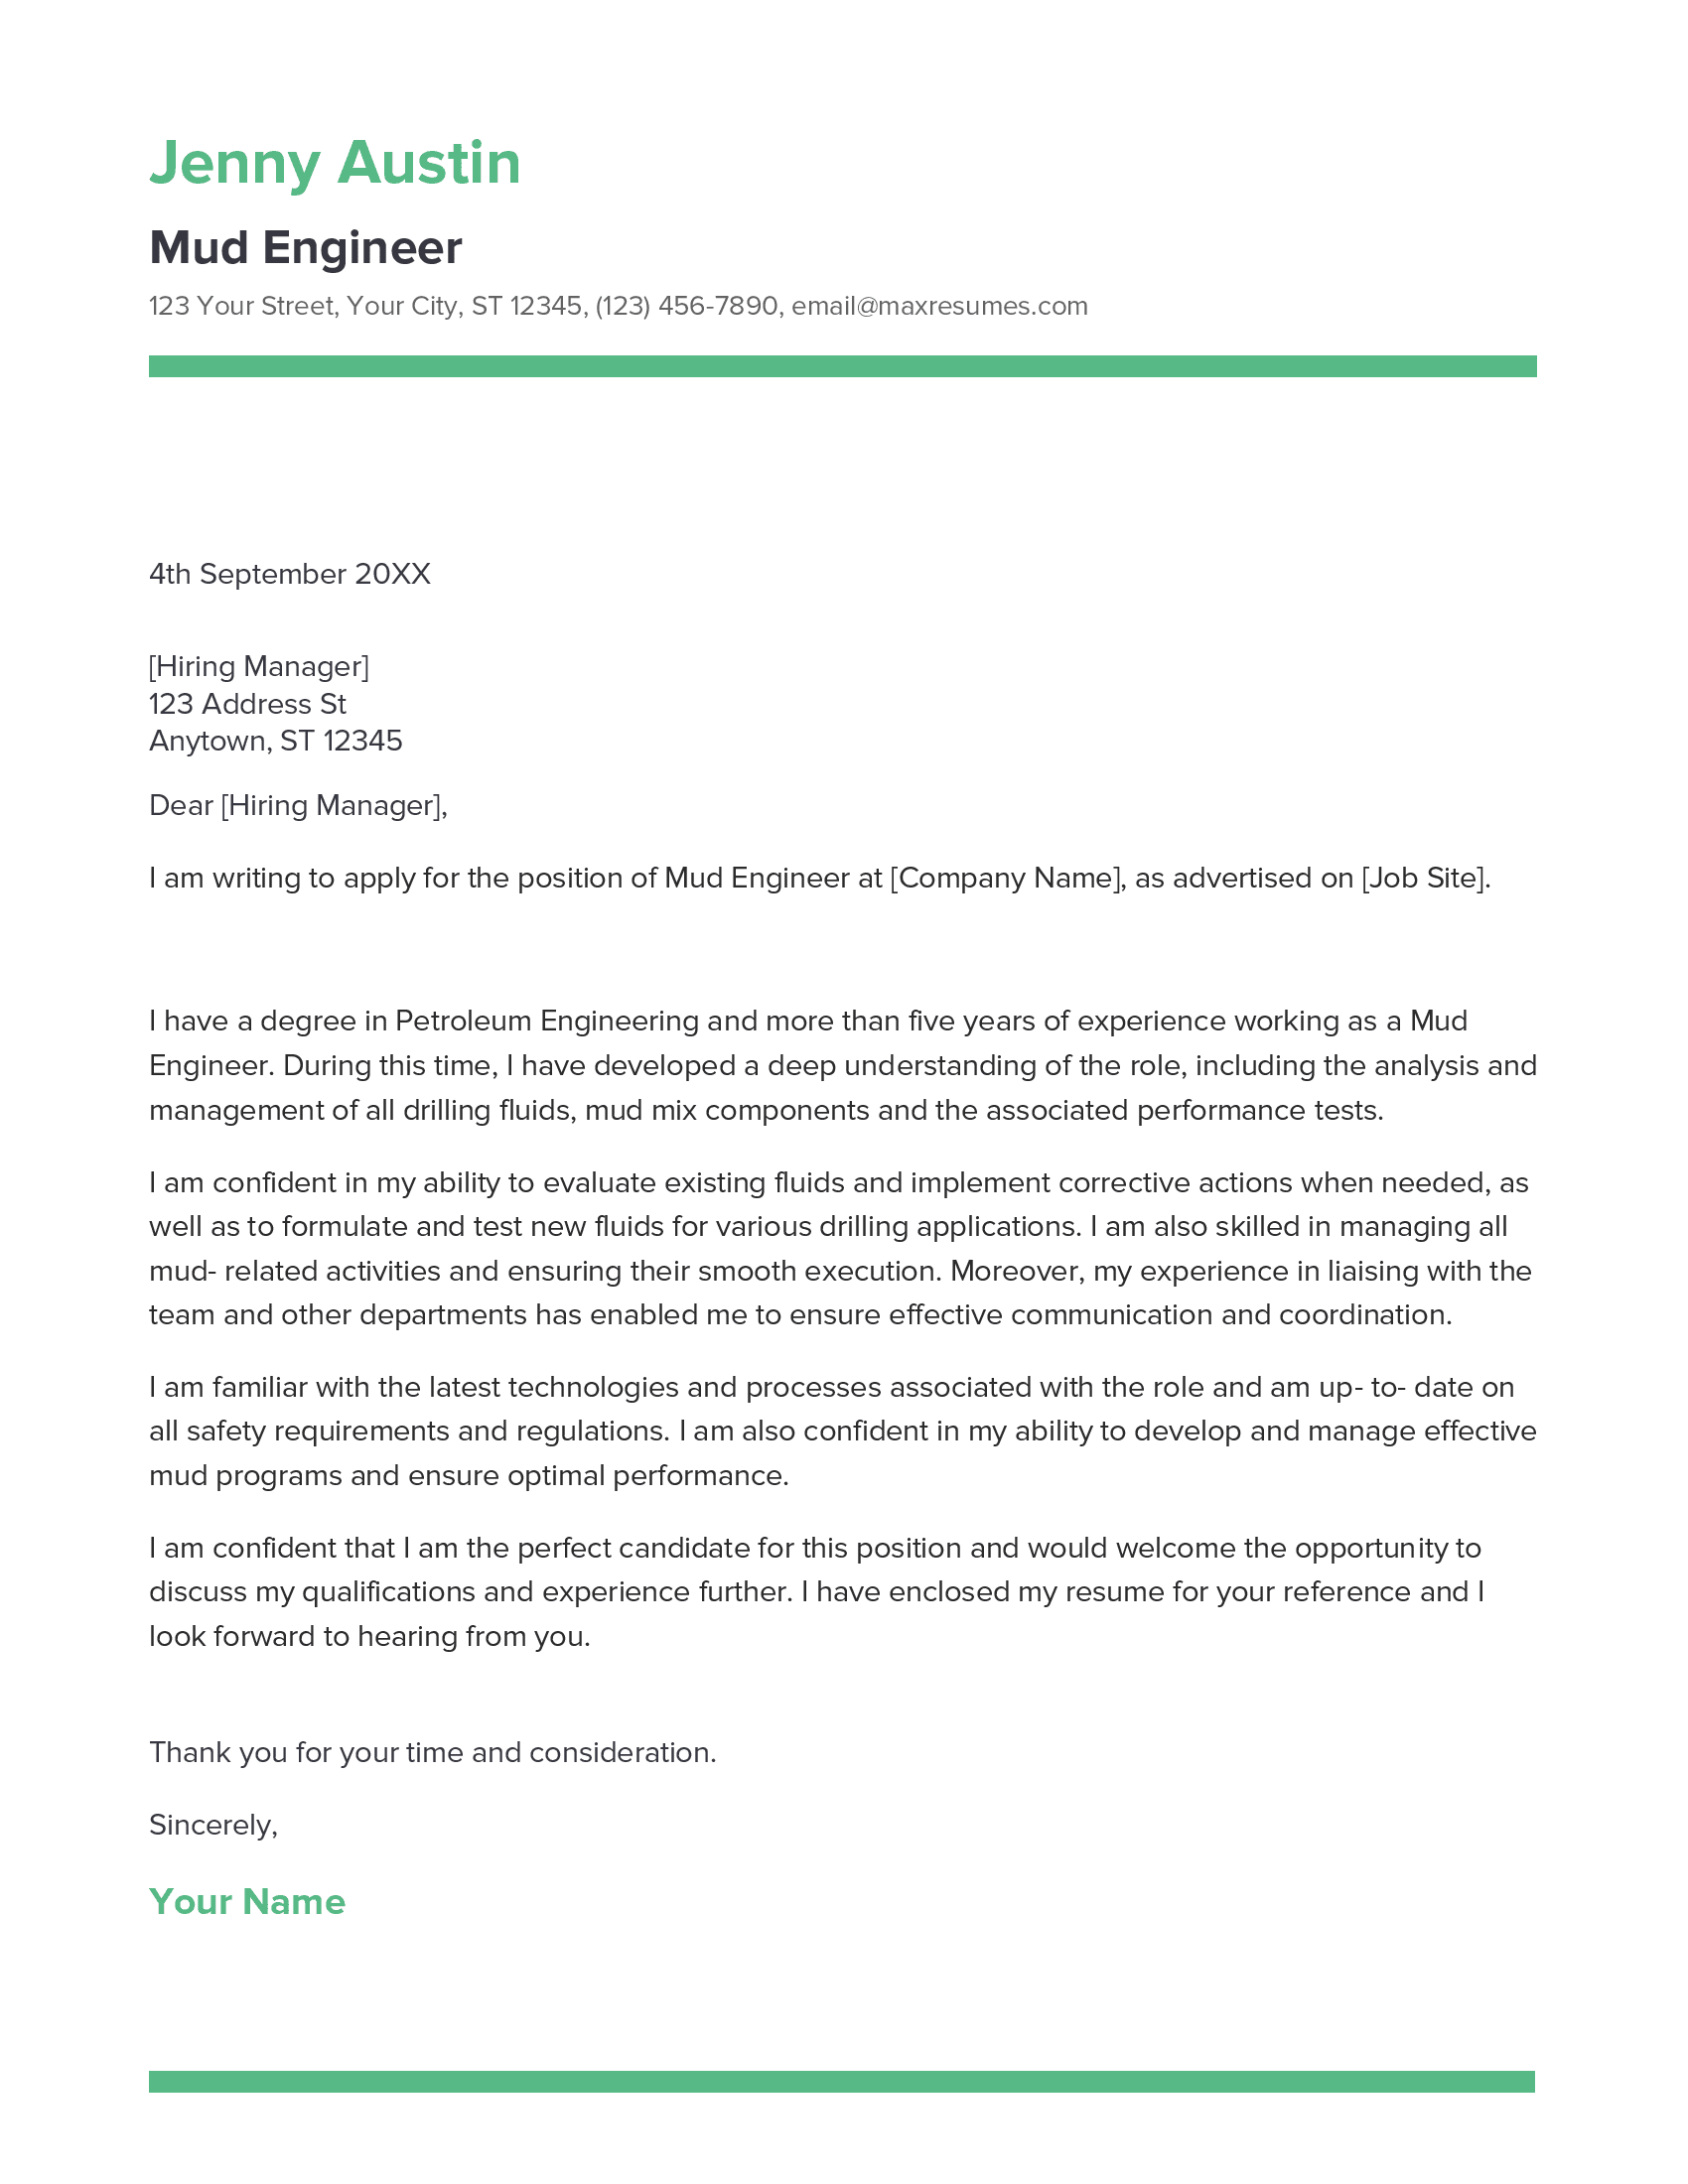 Mud Engineer Cover Letter Example